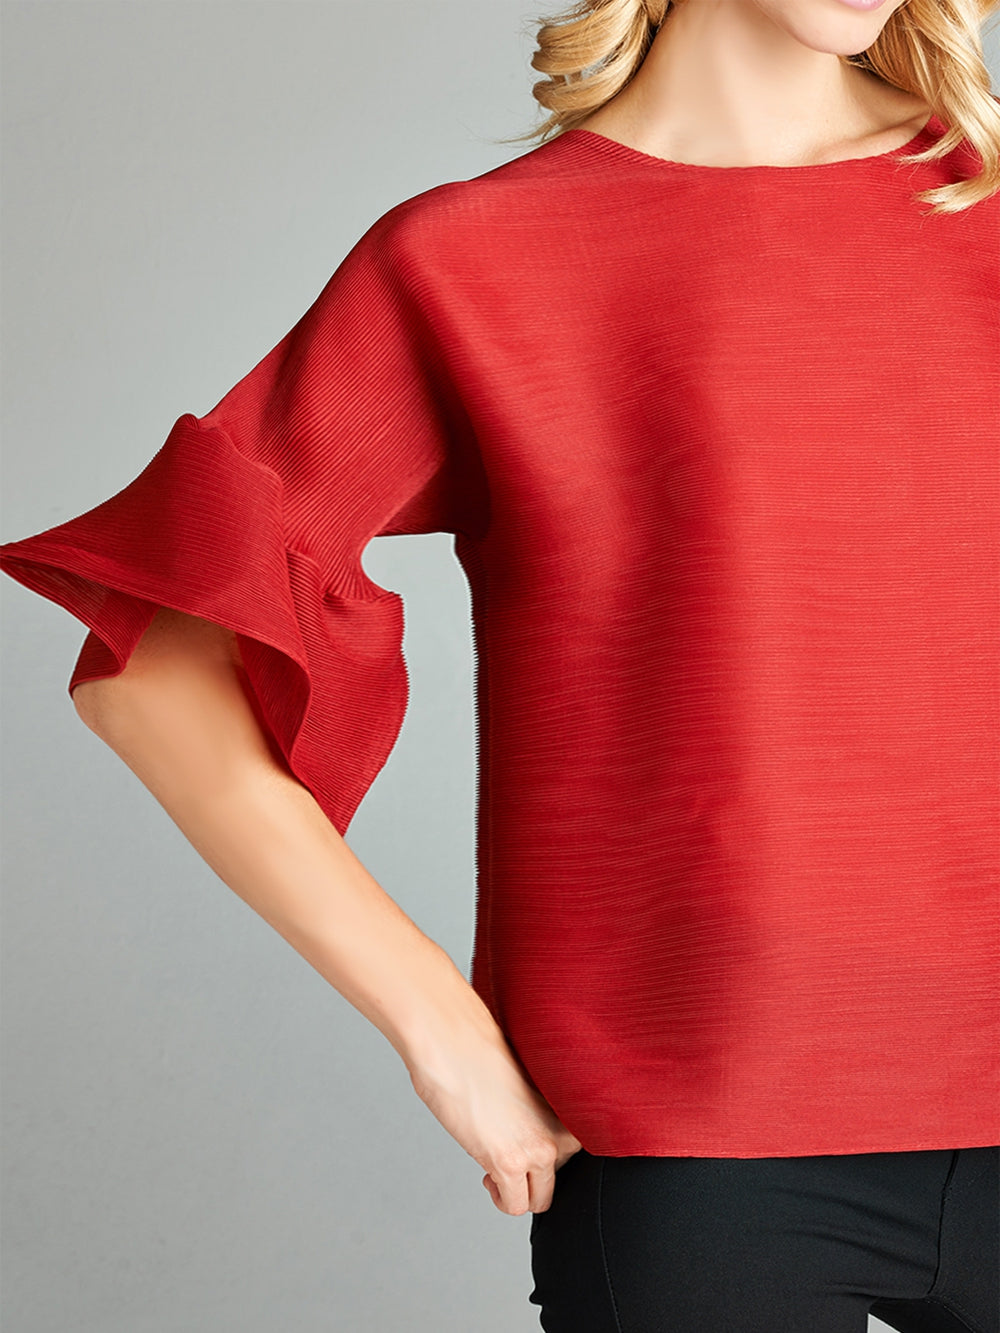 Pleated Red Audrey Top VLW115